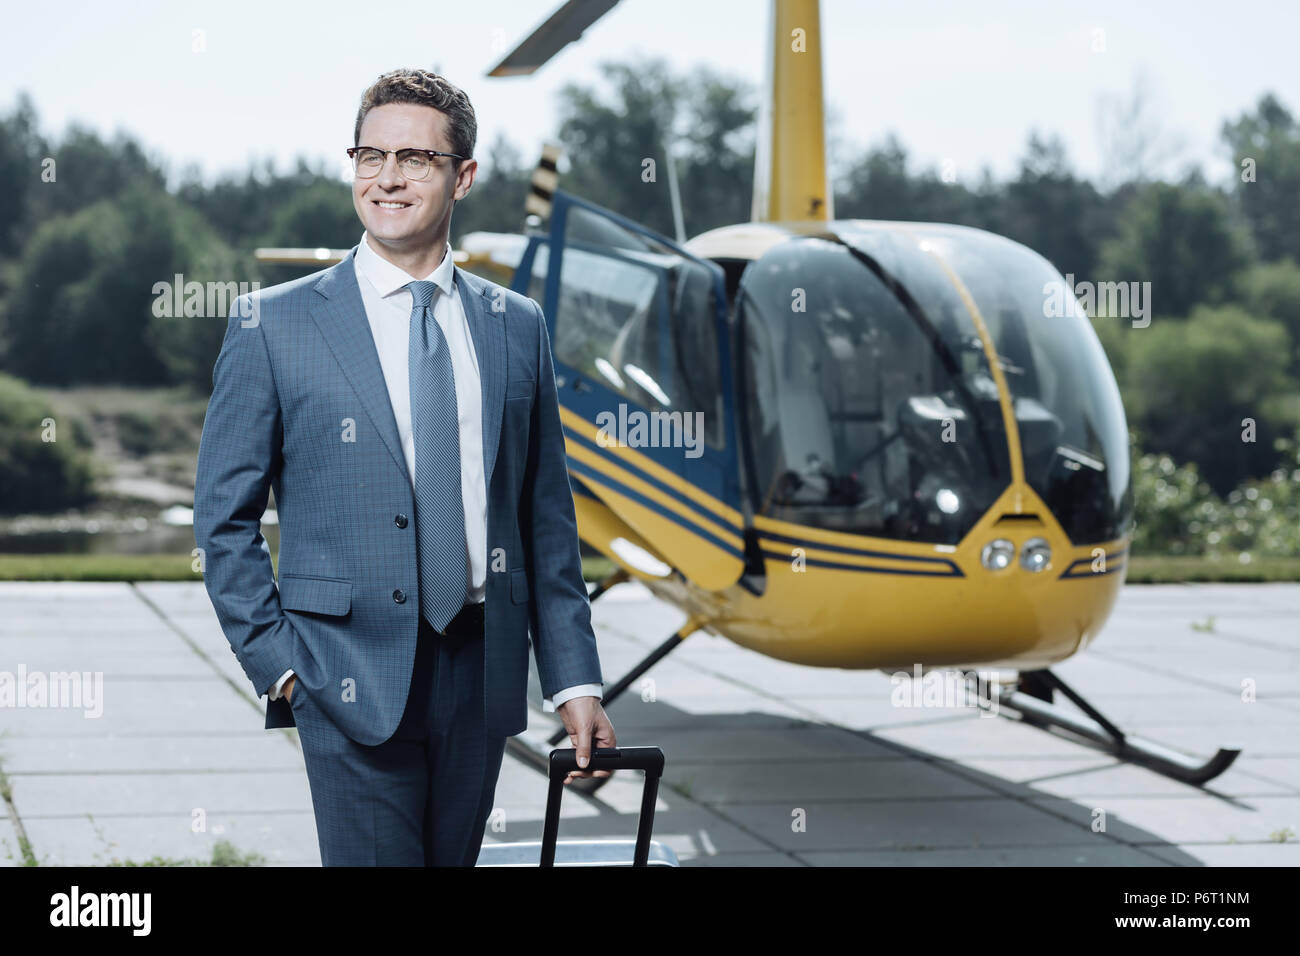 Successful young CEO being proud of helicopter purchase Stock Photo